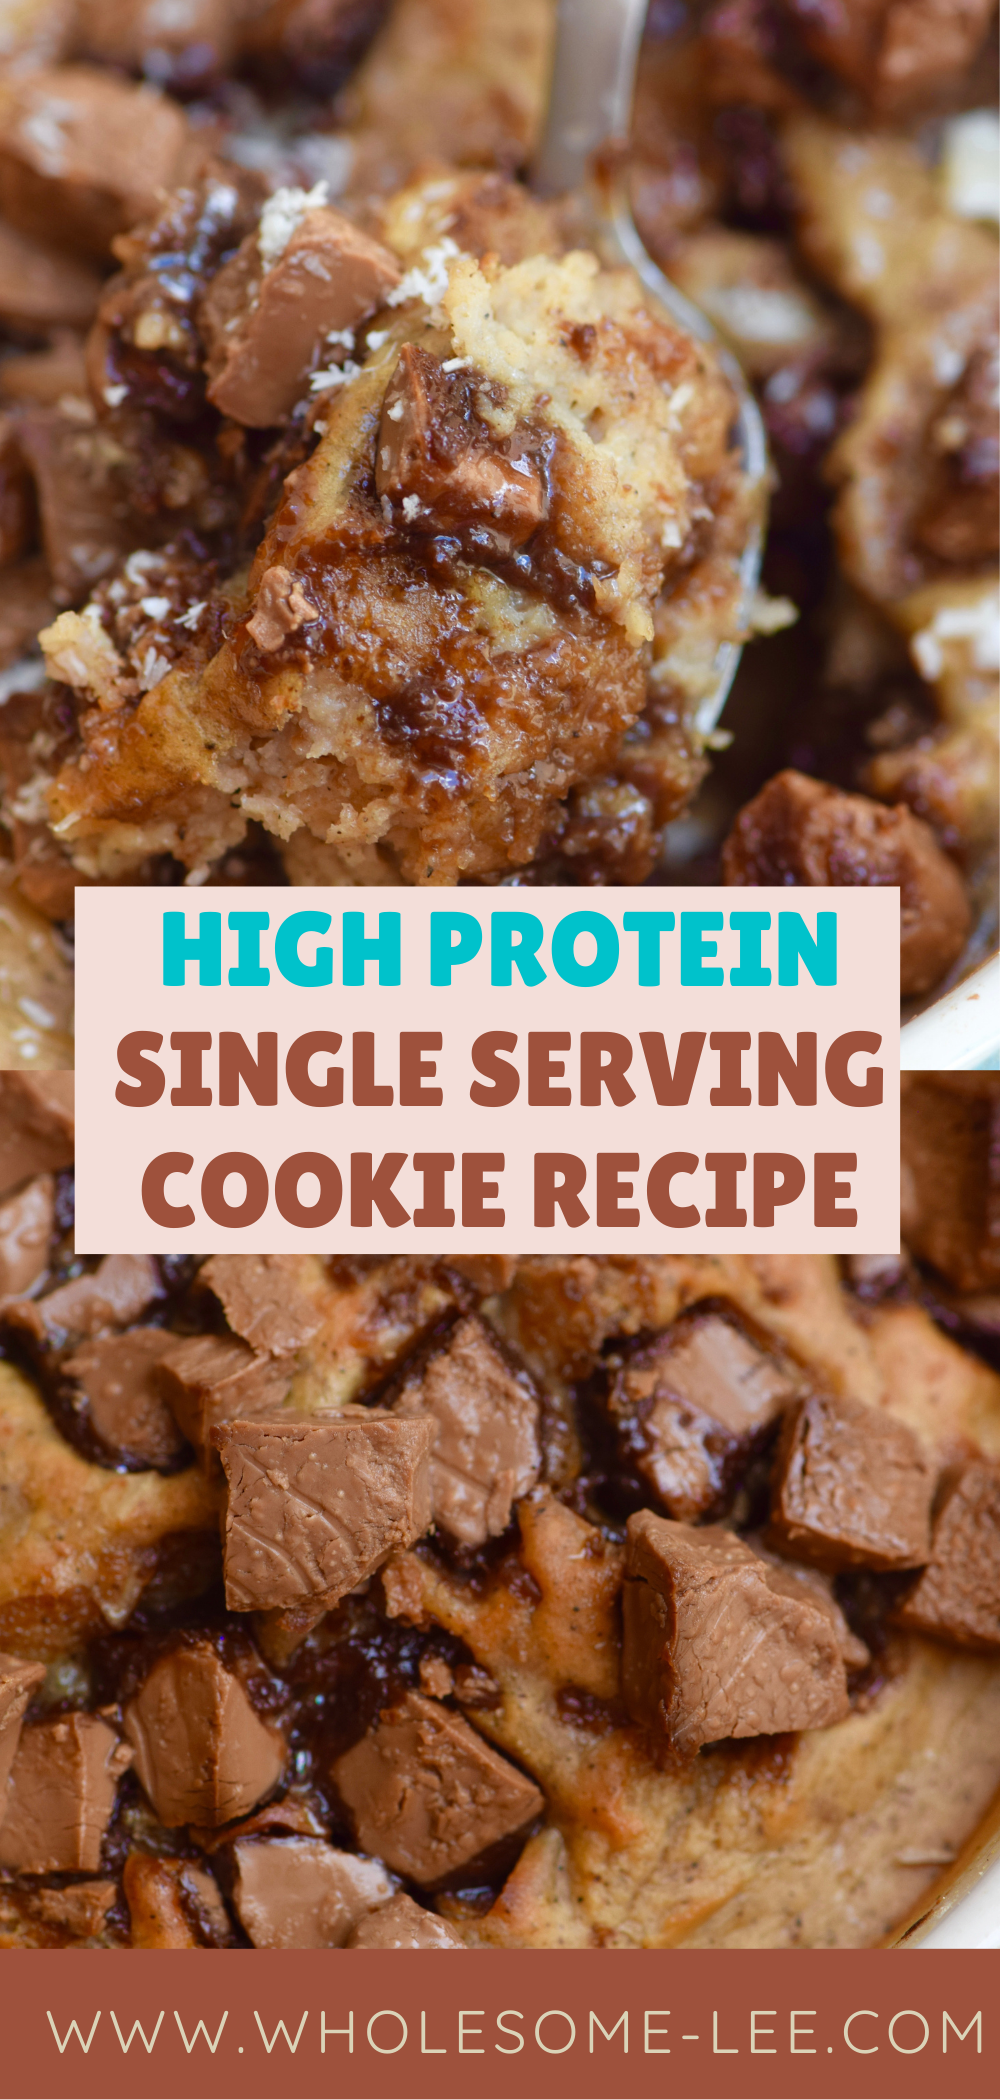 High protein single serving cookie recipe